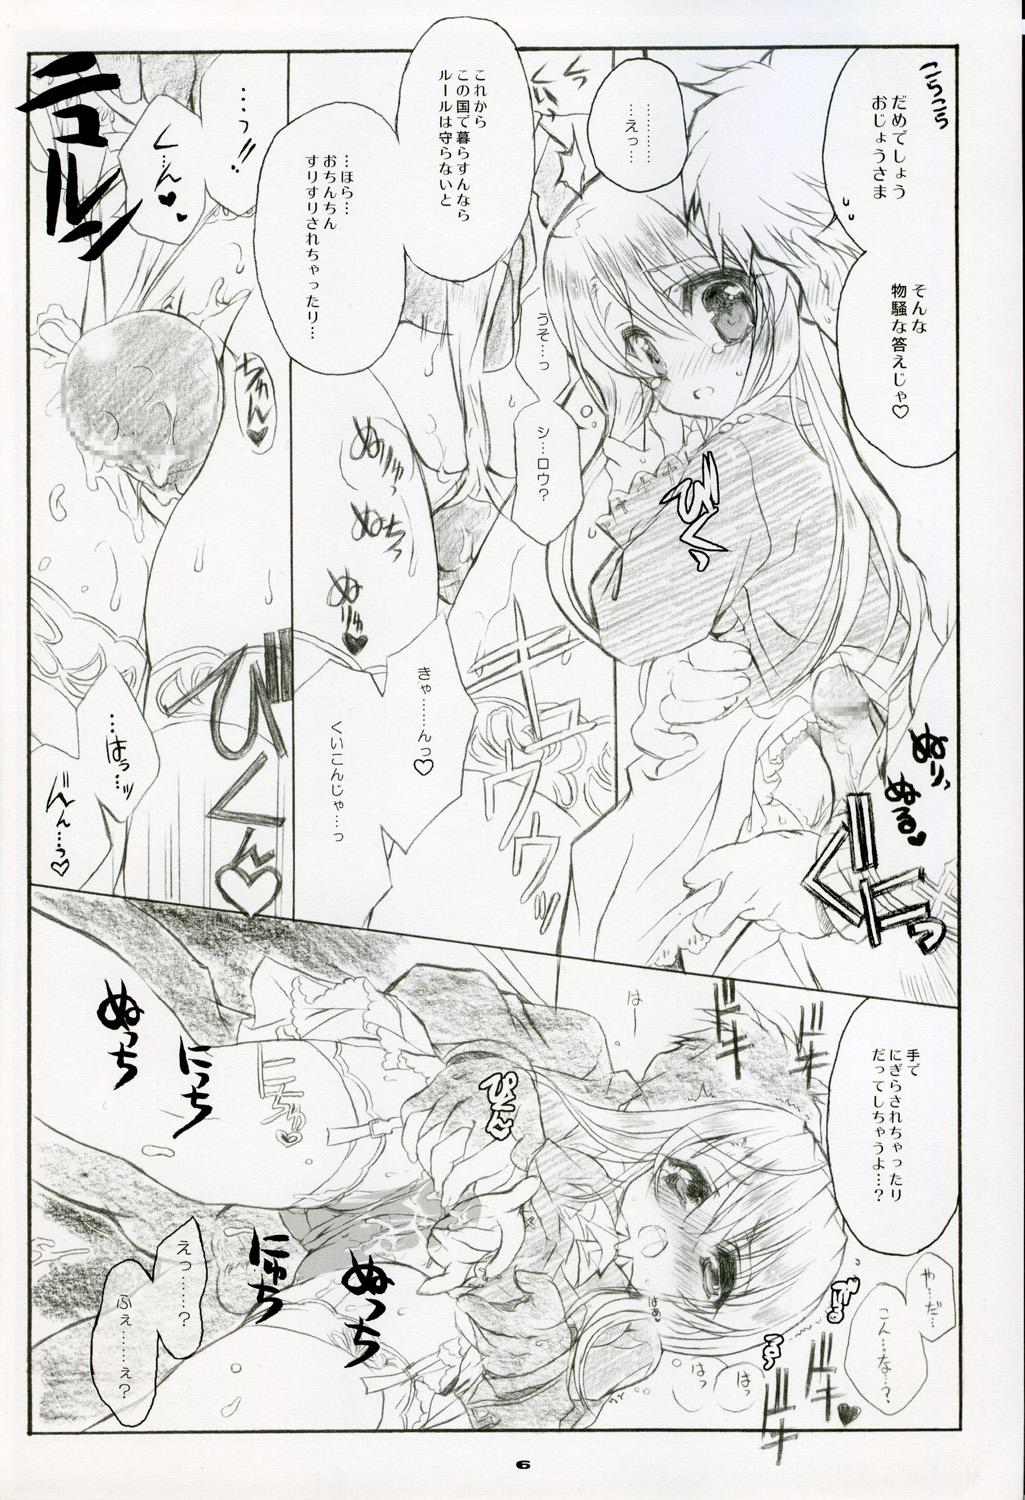 Pregnant Illya Train Shopping - Fate stay night Stretch - Page 6